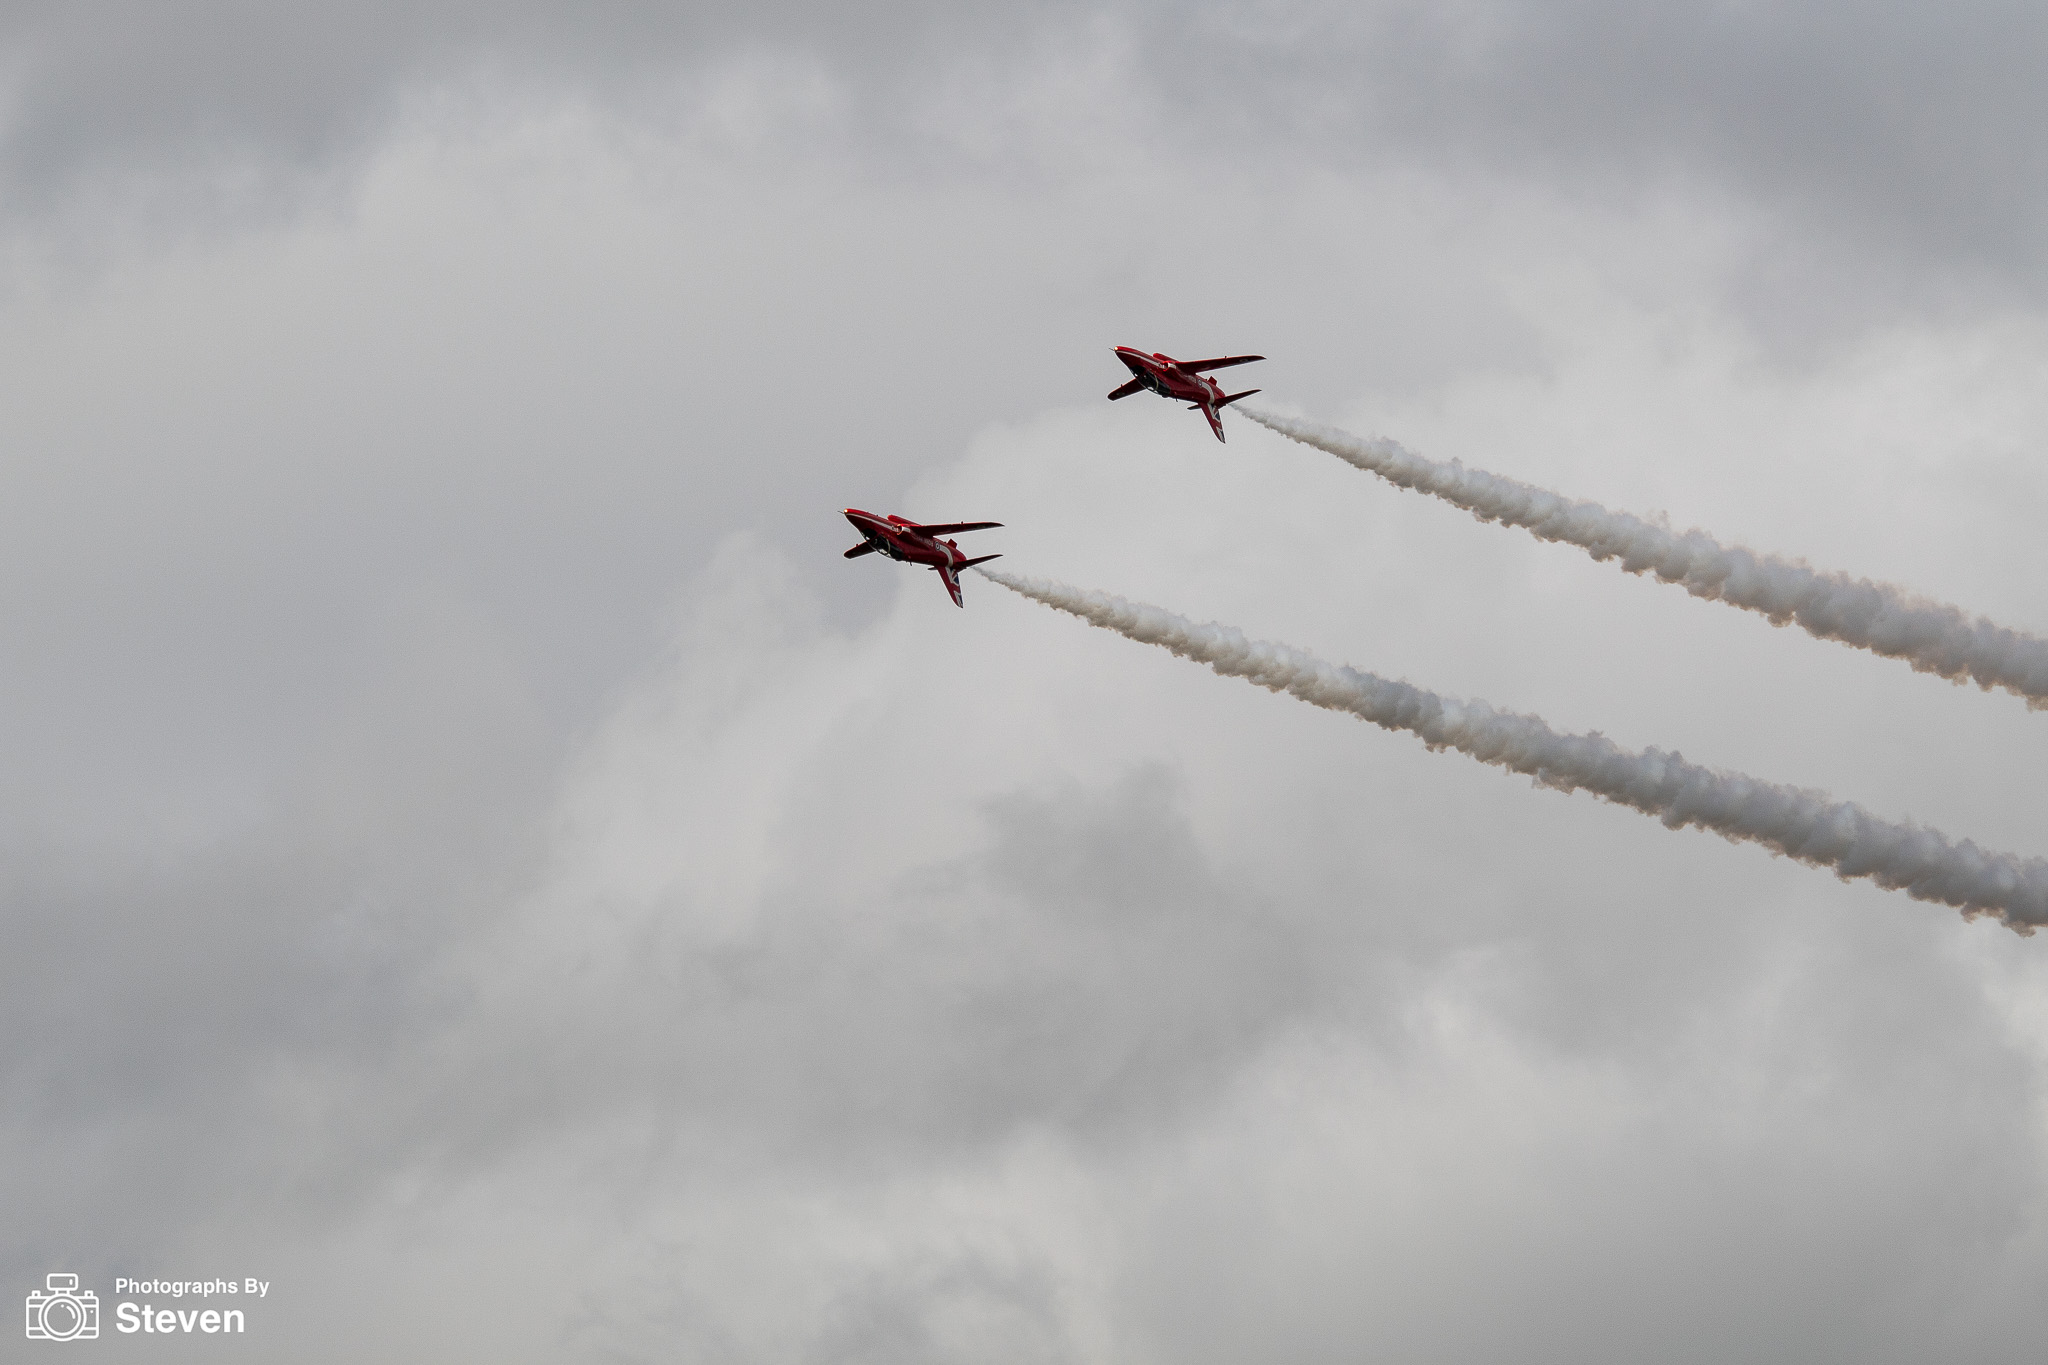 The RAF Red Arrows Upside Down